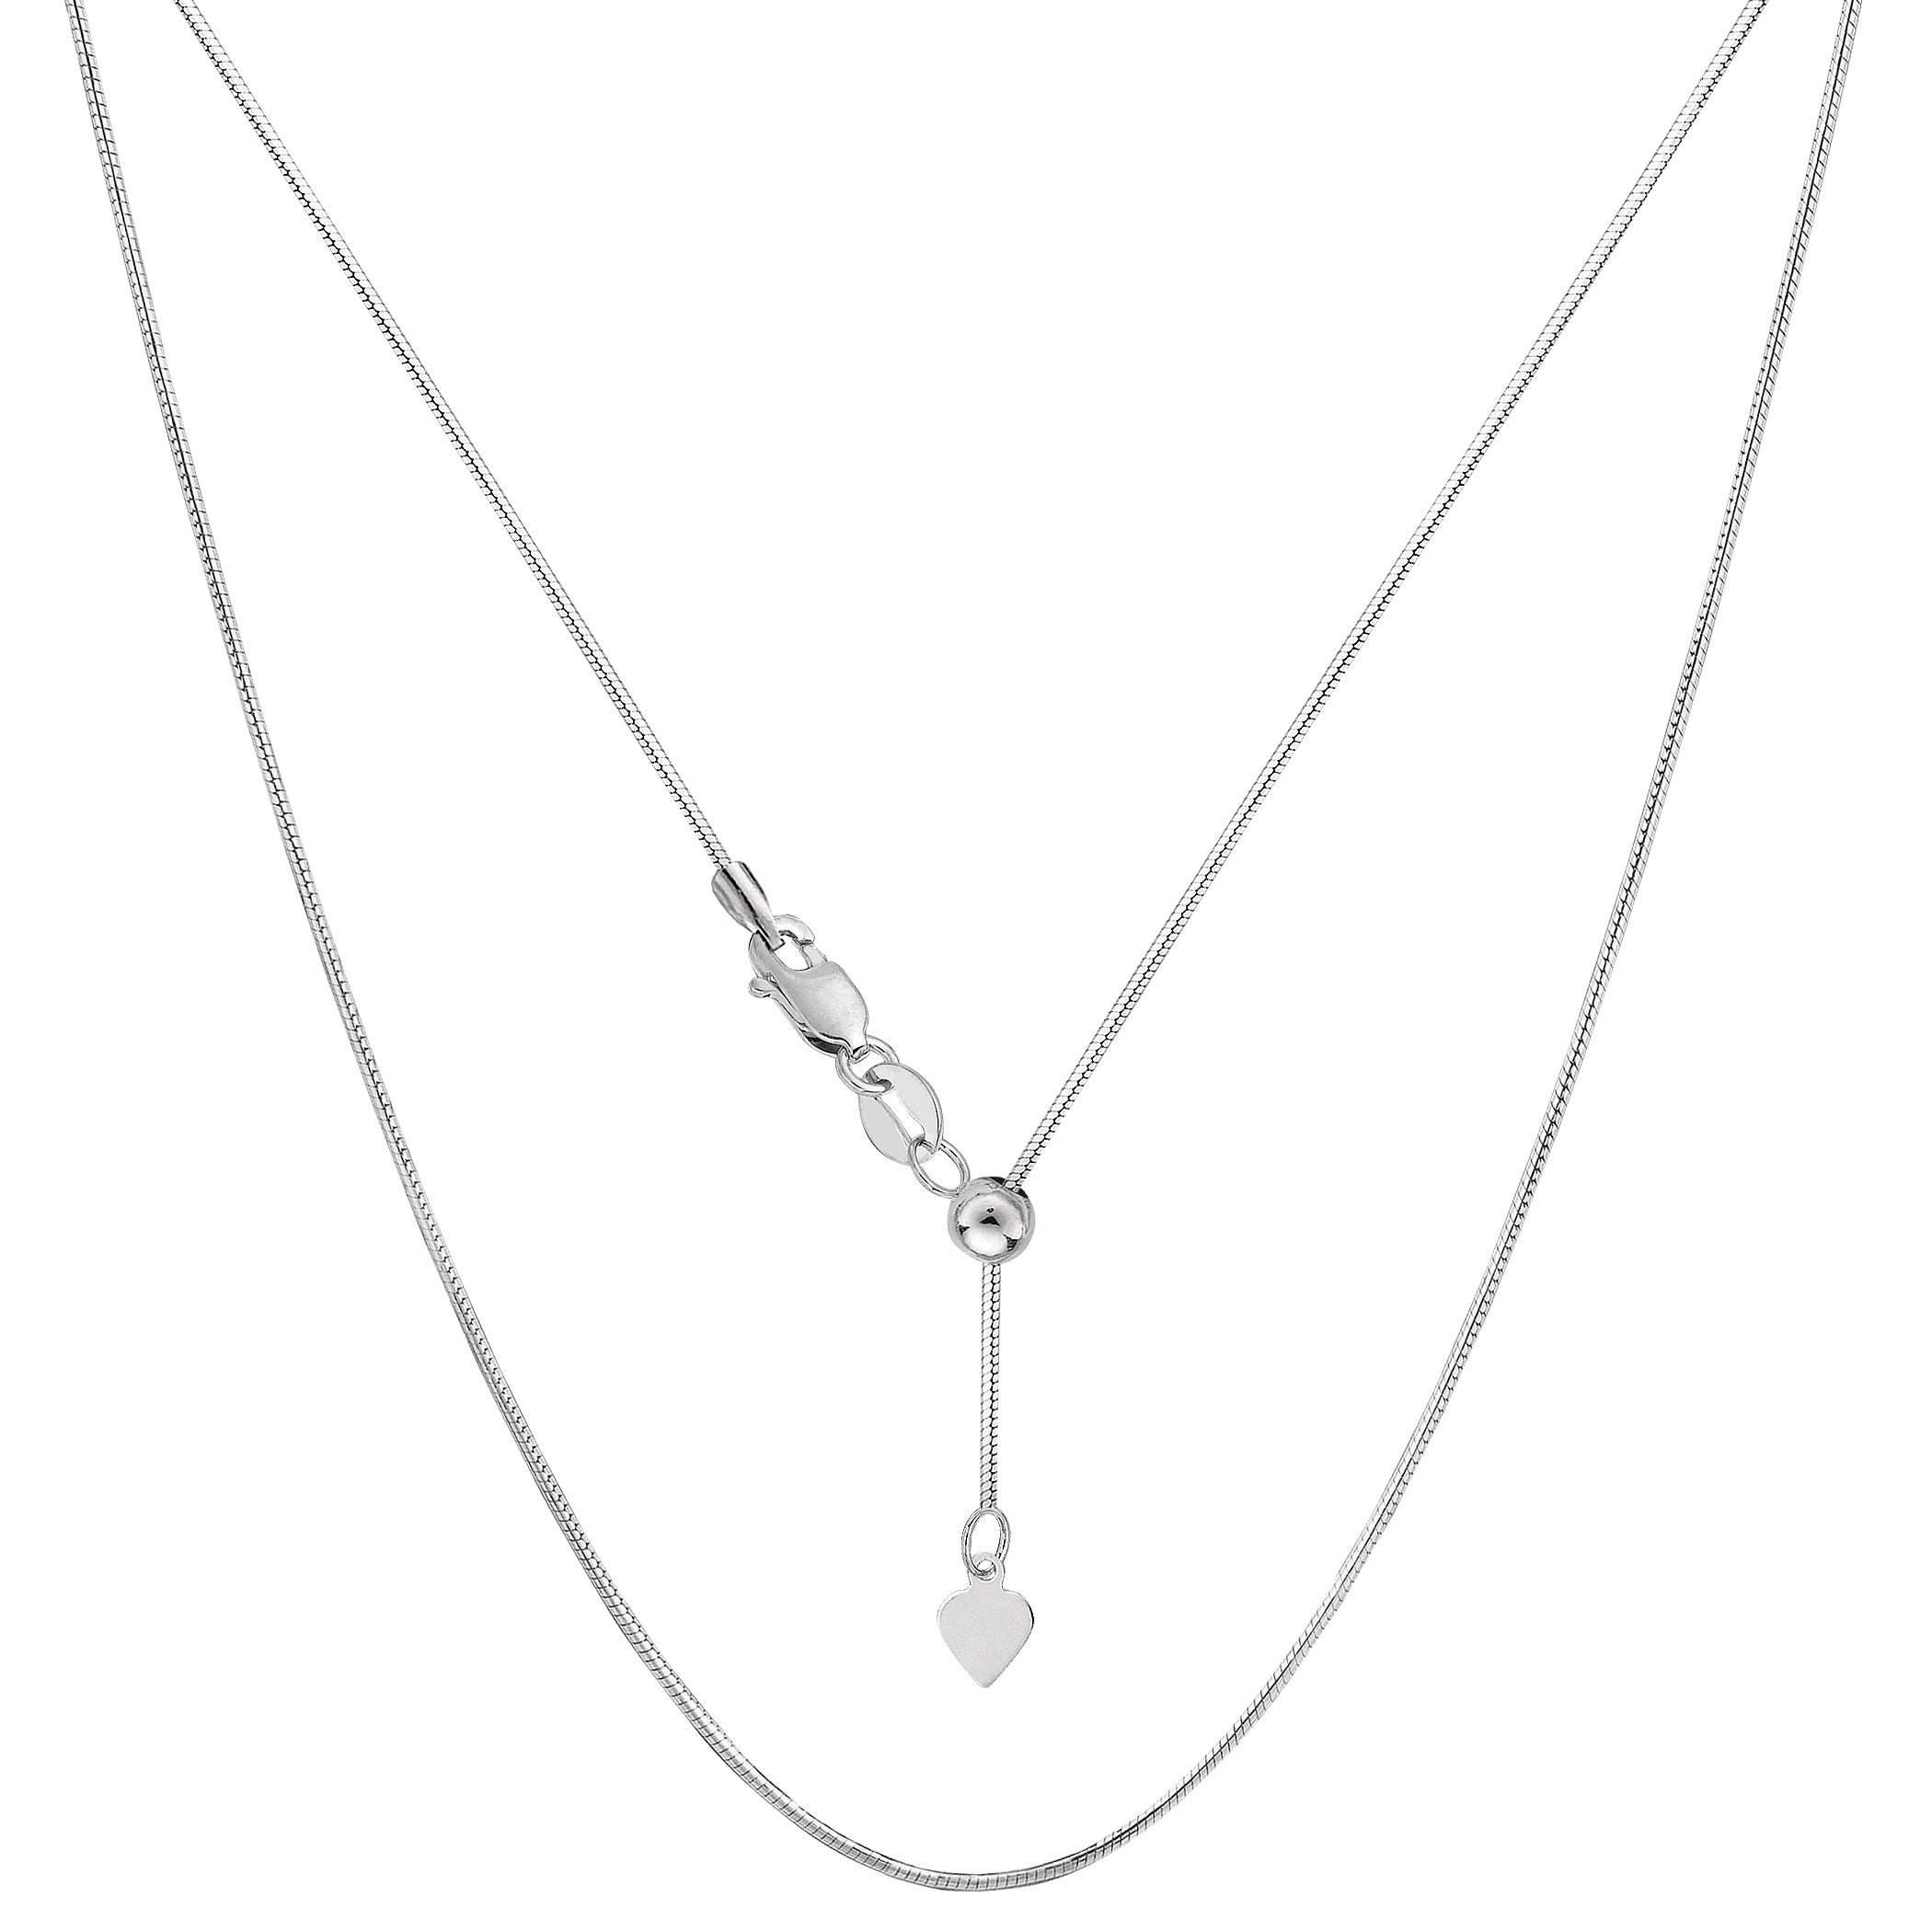 Sterling Silver Rhodium Plated Sliding Adjustable Snake Chain, 22" fine designer jewelry for men and women